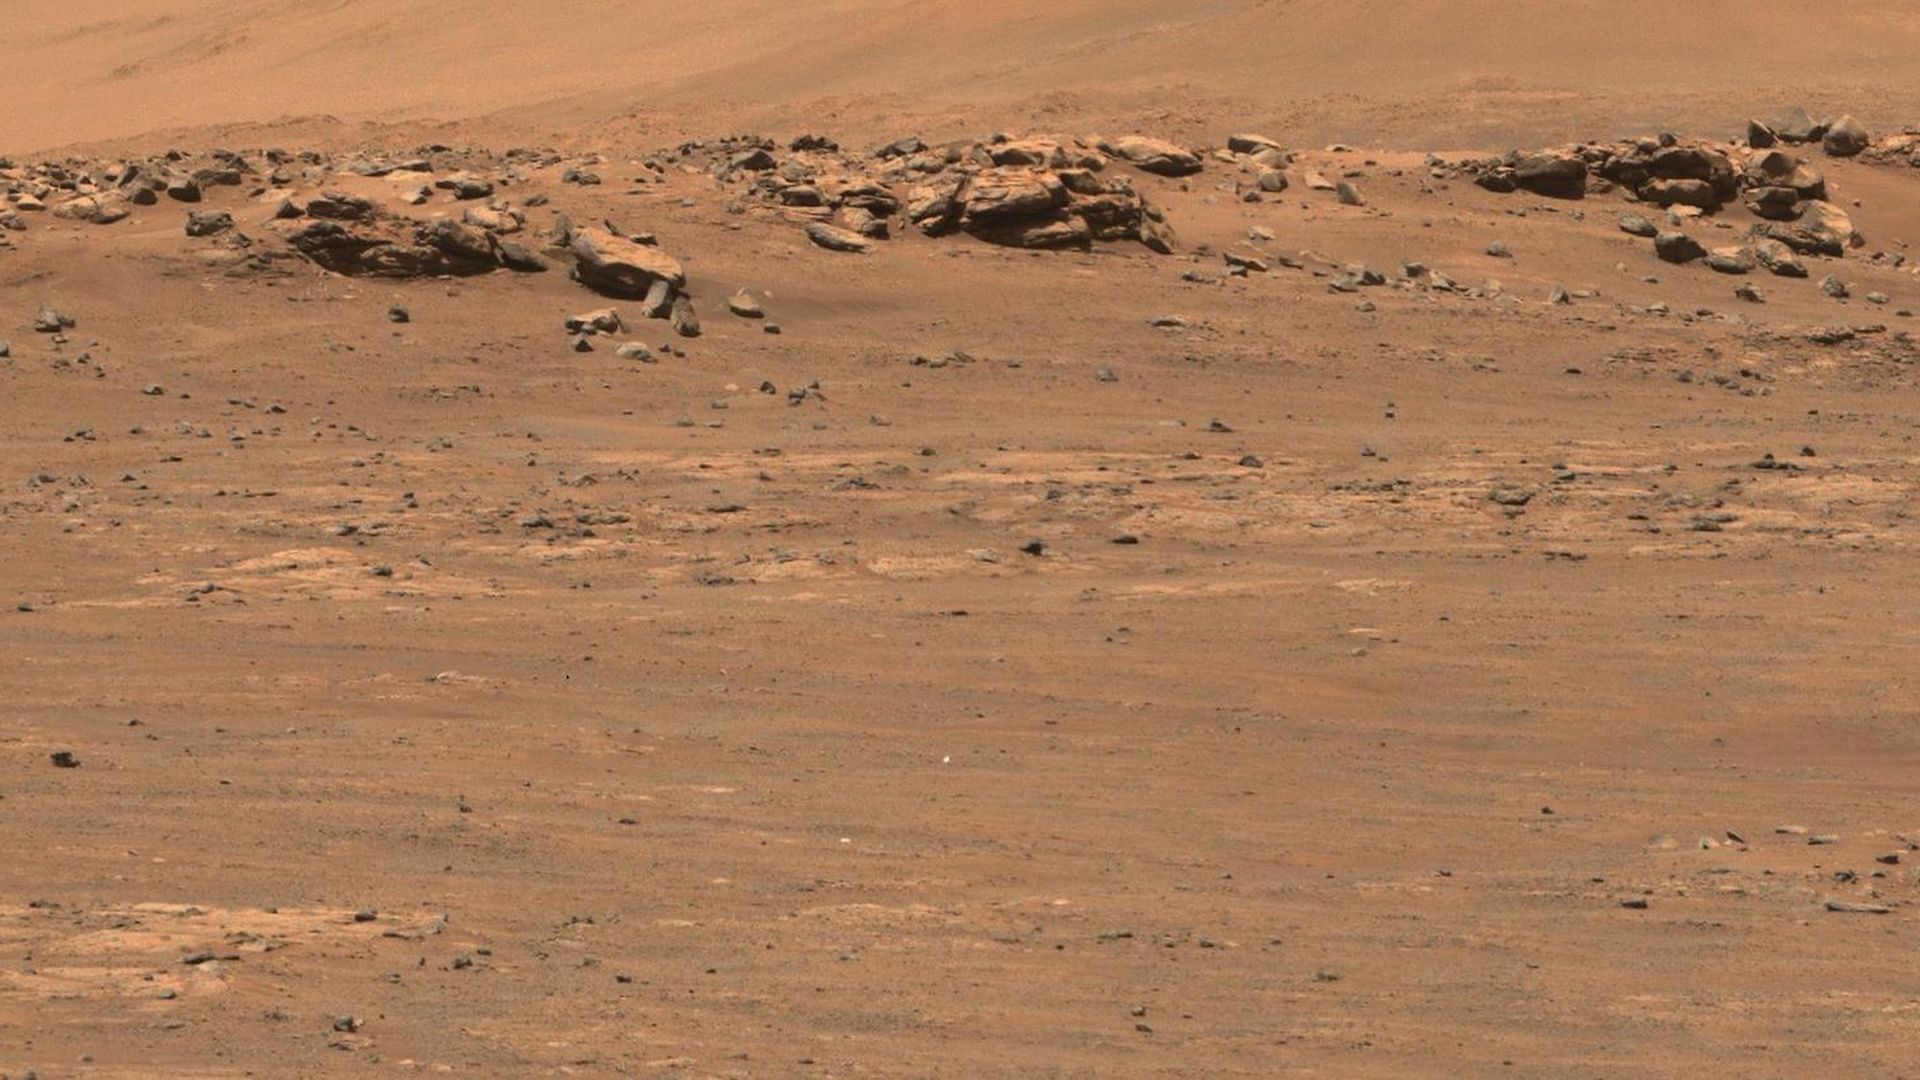 Mars as seen by the Perseverance rover.